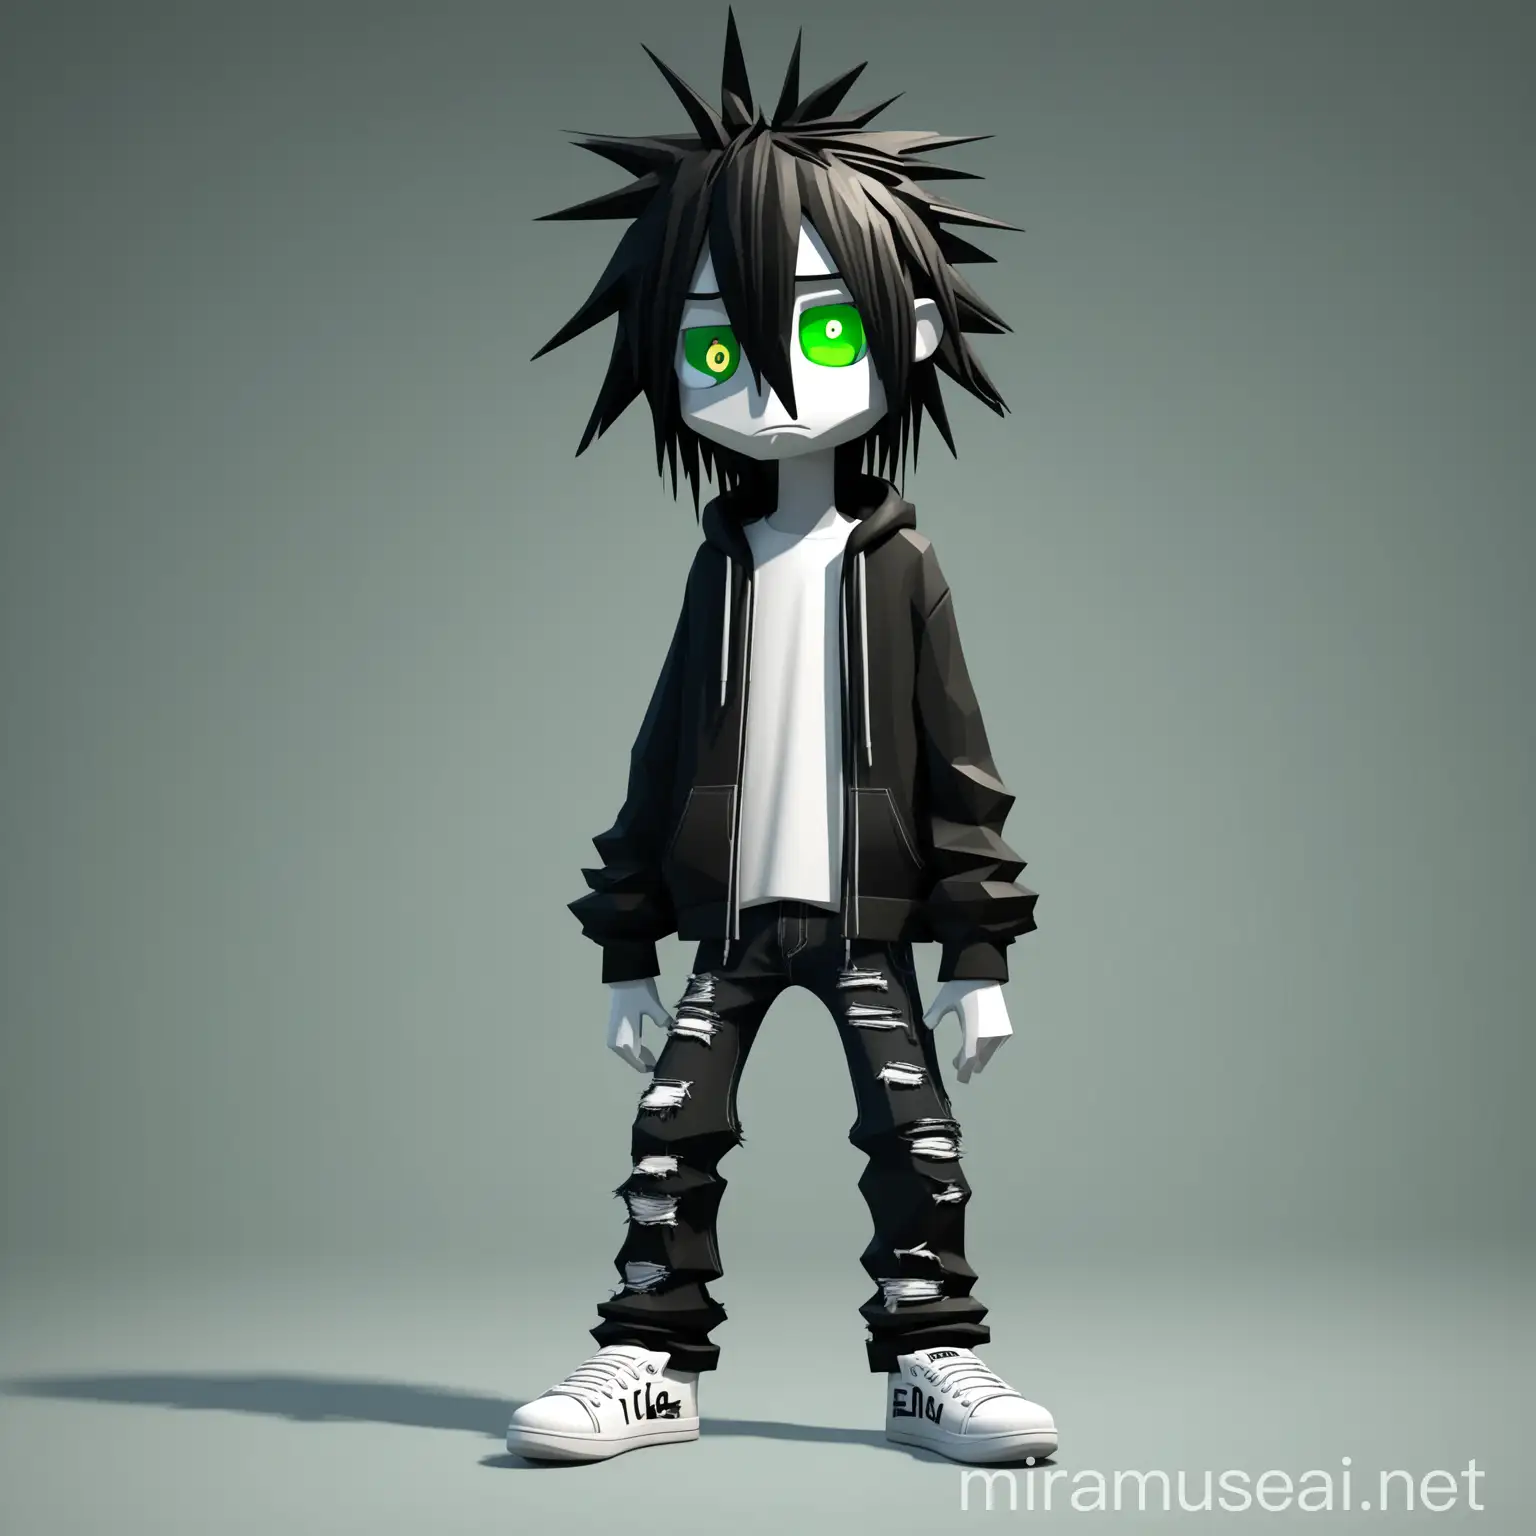 The cartoon depicts an emo boy, in the "T" position and in full height, in black baggy jeans and white low-top sneakers. He has long dark hair, disheveled and unkempt, green eyes.do this in the form of a cartoon small polygonal 3D character in full height (the head is smoother and larger).
